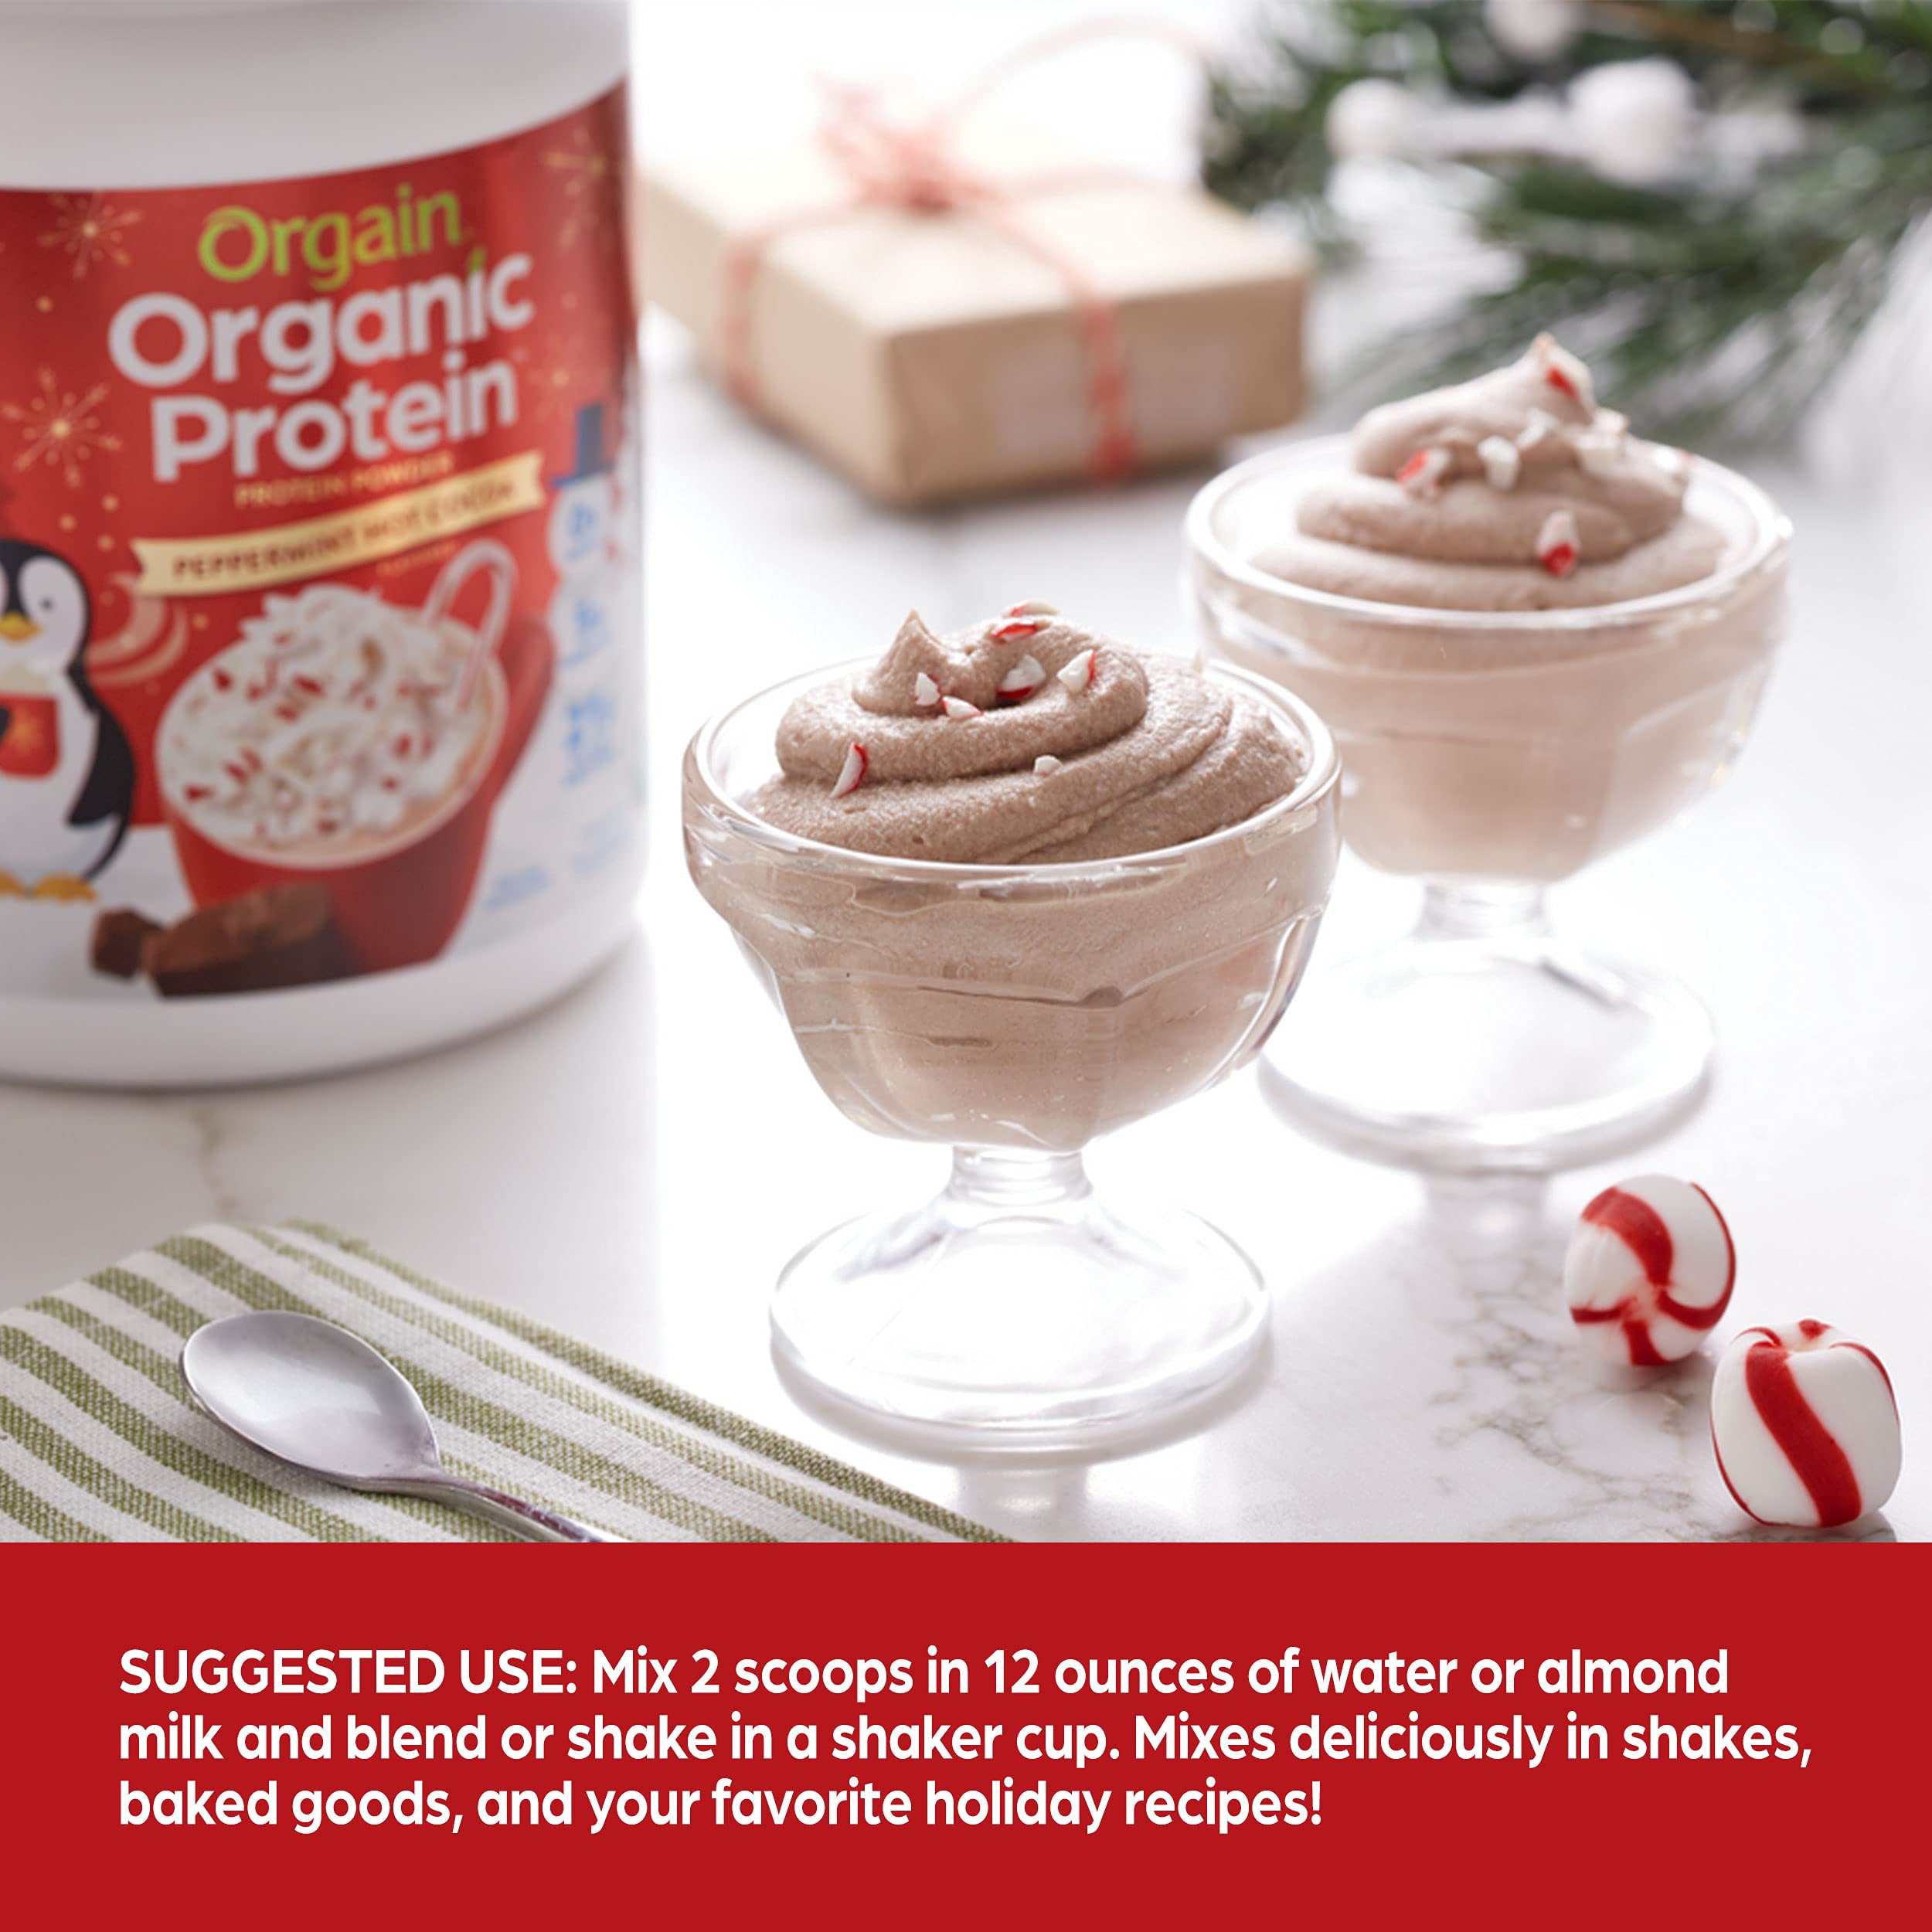 Orgain Organic Vegan Protein Powder, Holiday Peppermint Hot Cocoa - 21g Plant Based Protein, Gluten Free, Dairy Free, Lactose Free, Soy Free, No Sugar Added, Kosher, For Smoothies & Shakes - 1.02lb